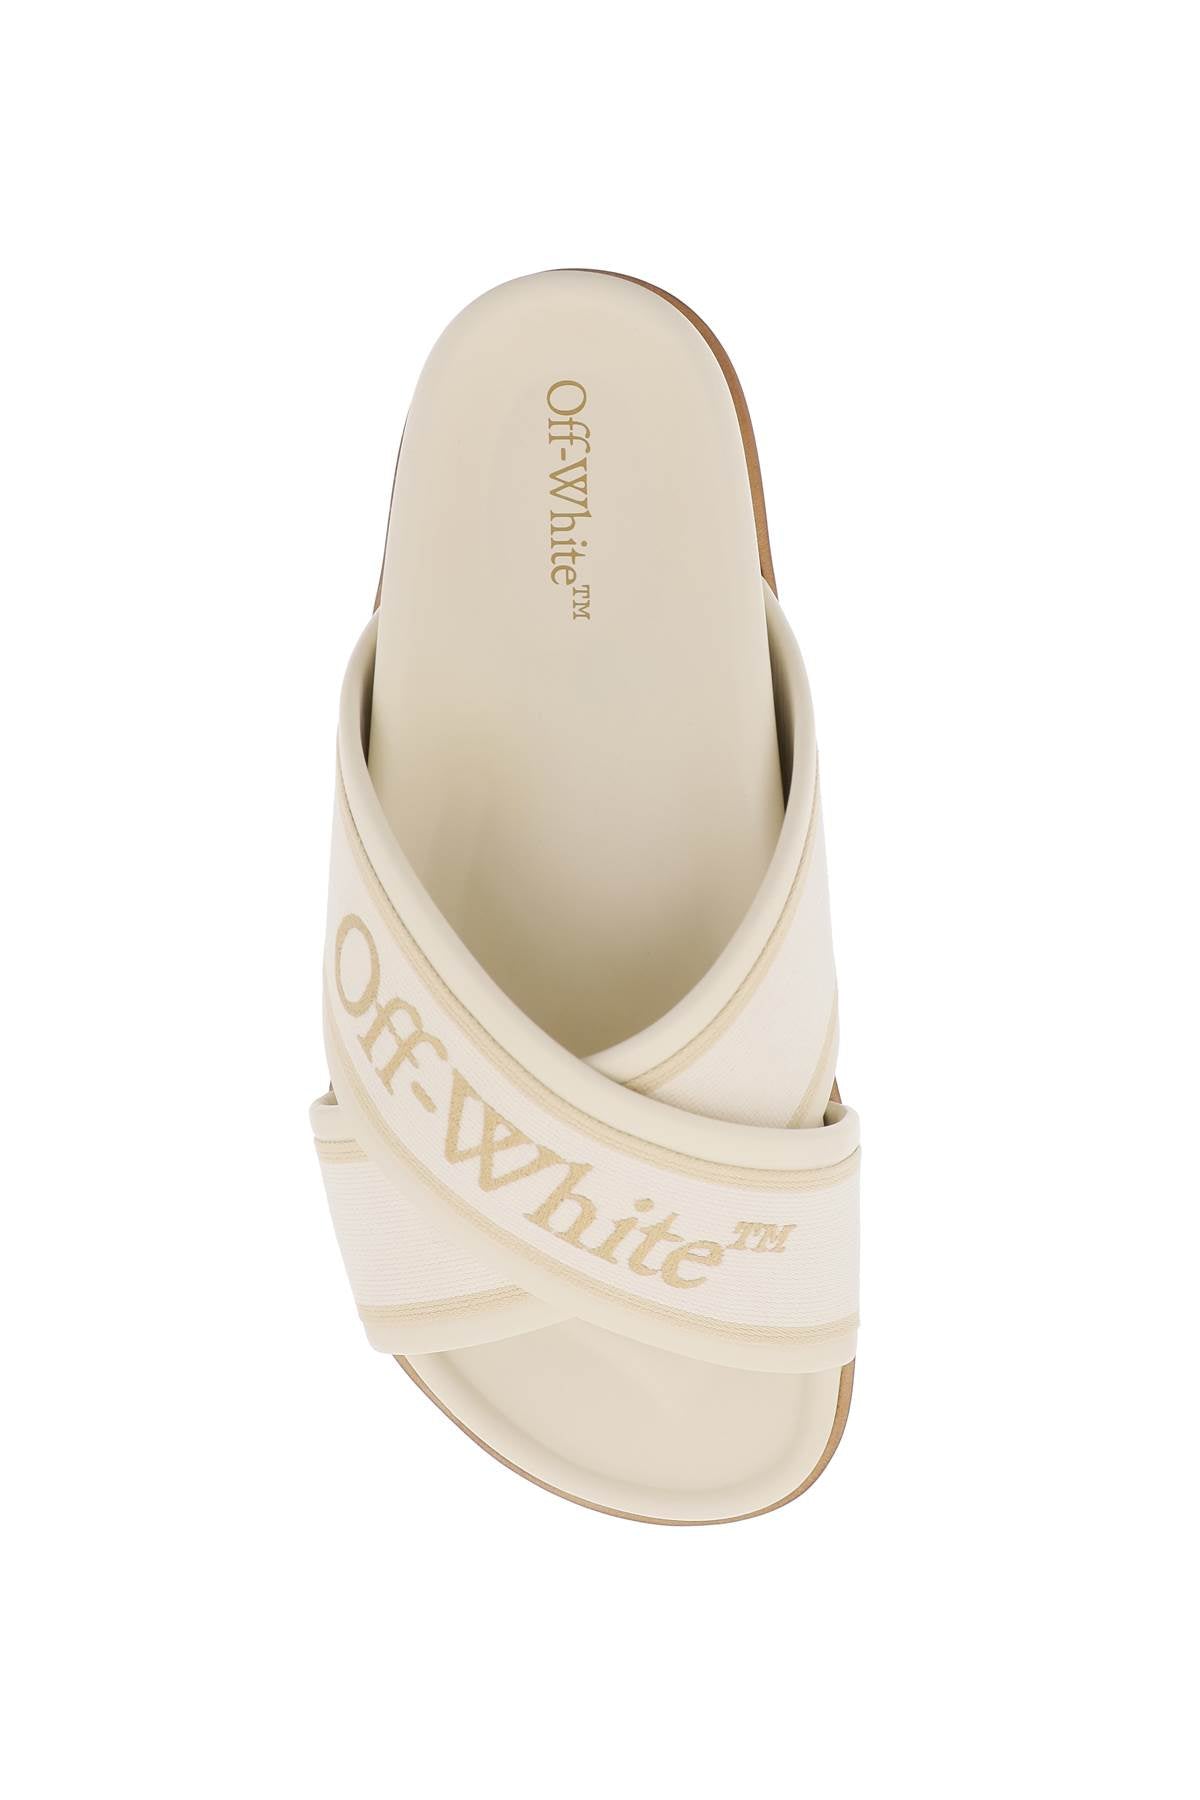 OFF-WHITE Grey Embroidered Leather Sandals for Women from SS24 Collection